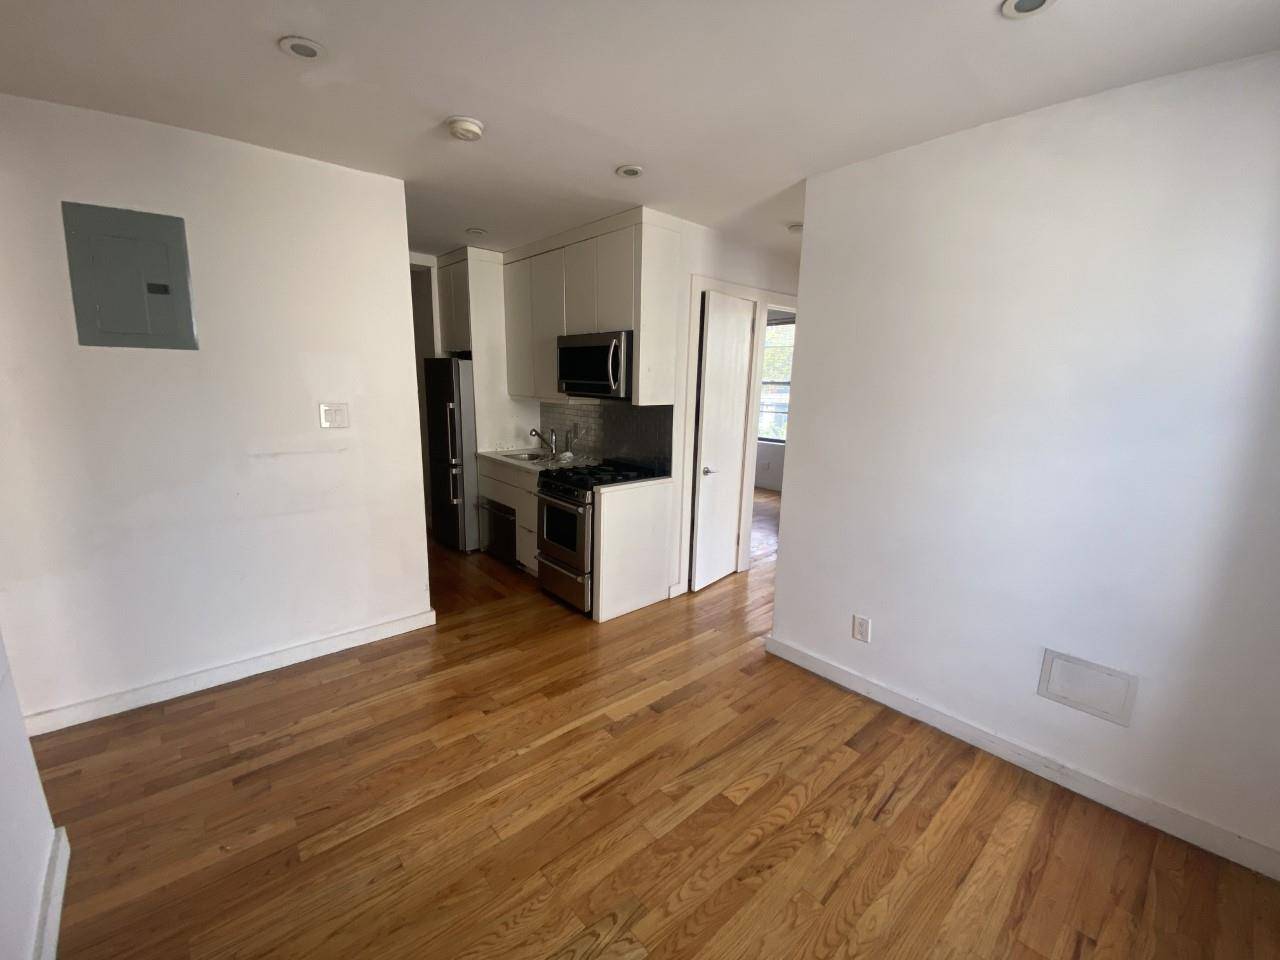 Large 3 bedroom with home office Laundry in Unit Dishwasher 2 floor walkup Video of unit available when requestedPrime South Park Slope apartment featuring exposed brick, bleached plank floors, custom ...